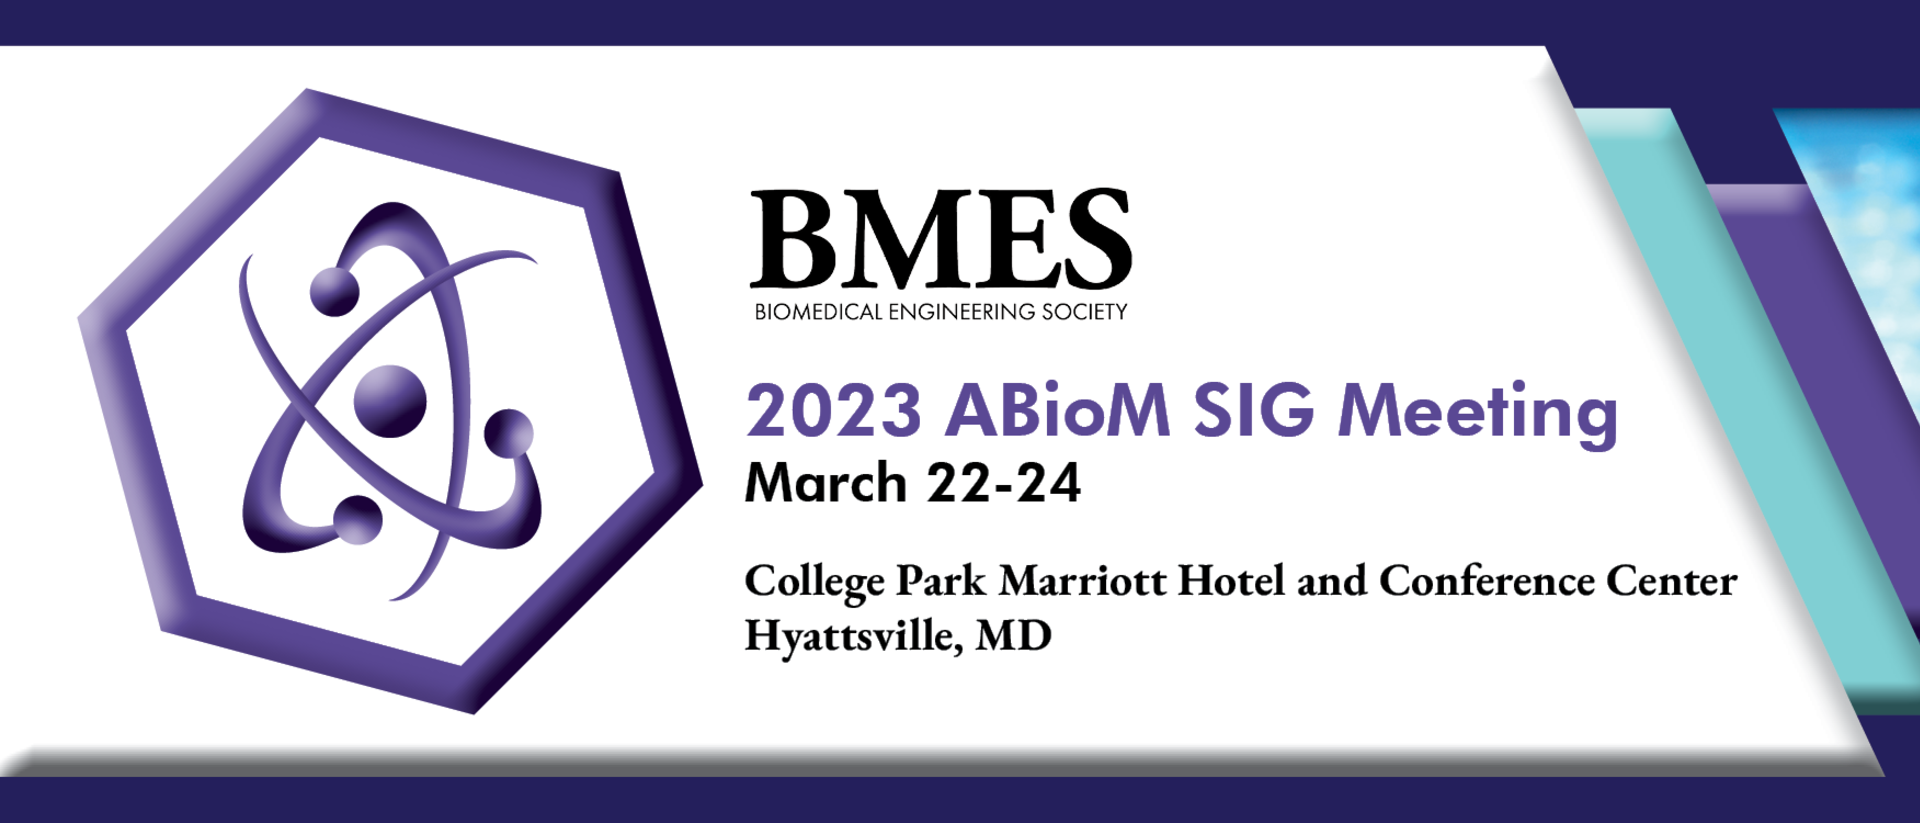 Dr. Mu received Junior Investigator Research Award from 2023 BMES ABioM